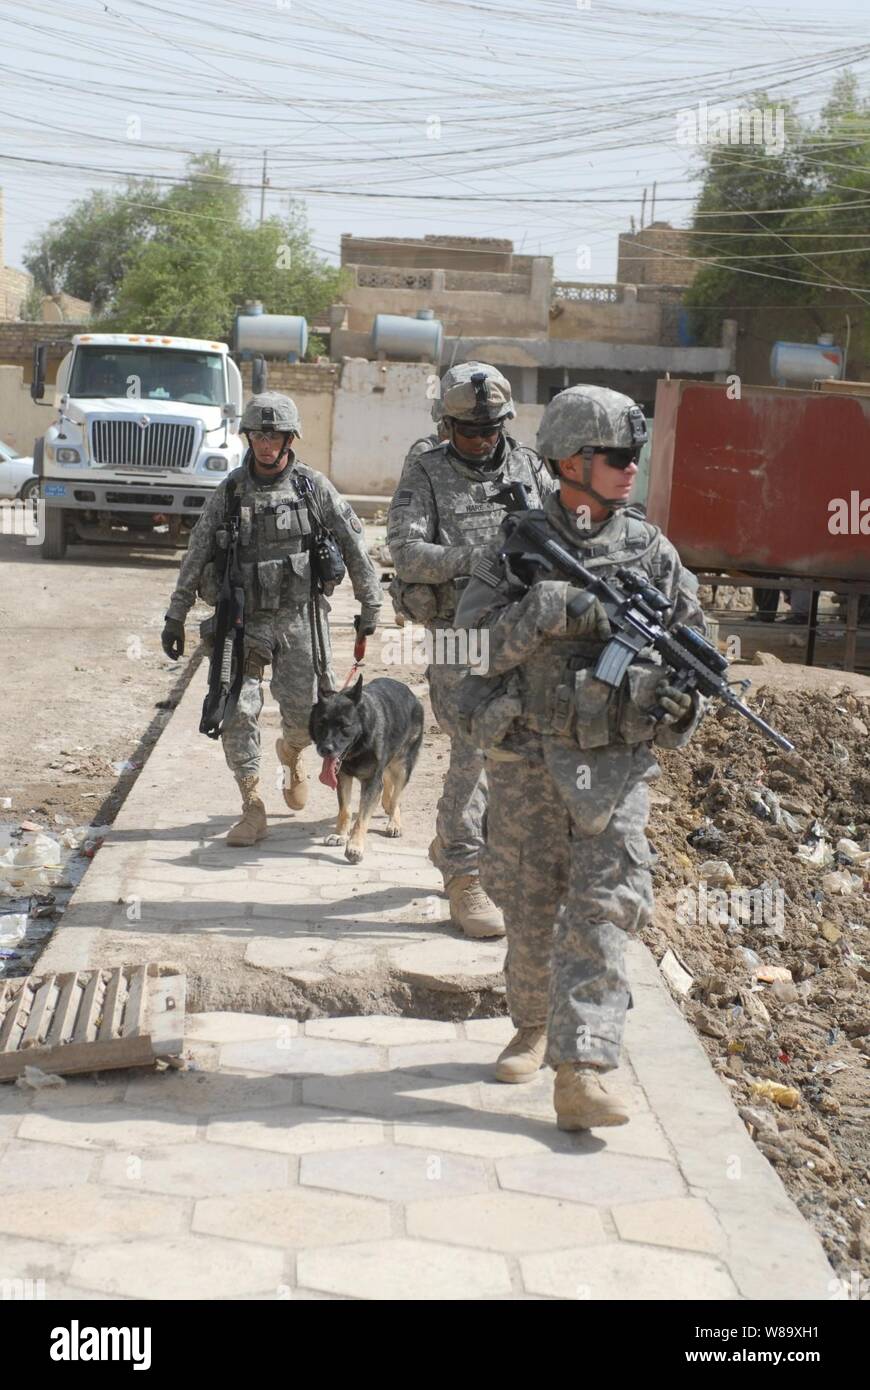 U.S. Army soldiers attached to 4th Battalion, 6th Infantry Regiment, 4th Brigade Combat Team, 1st Armored Division and soldiers attached to the provost marshalís office with Multi-National Corps - Iraq search for evidence of insurgency in a town in the Maysan province of Iraq on June 2, 2009. Stock Photo